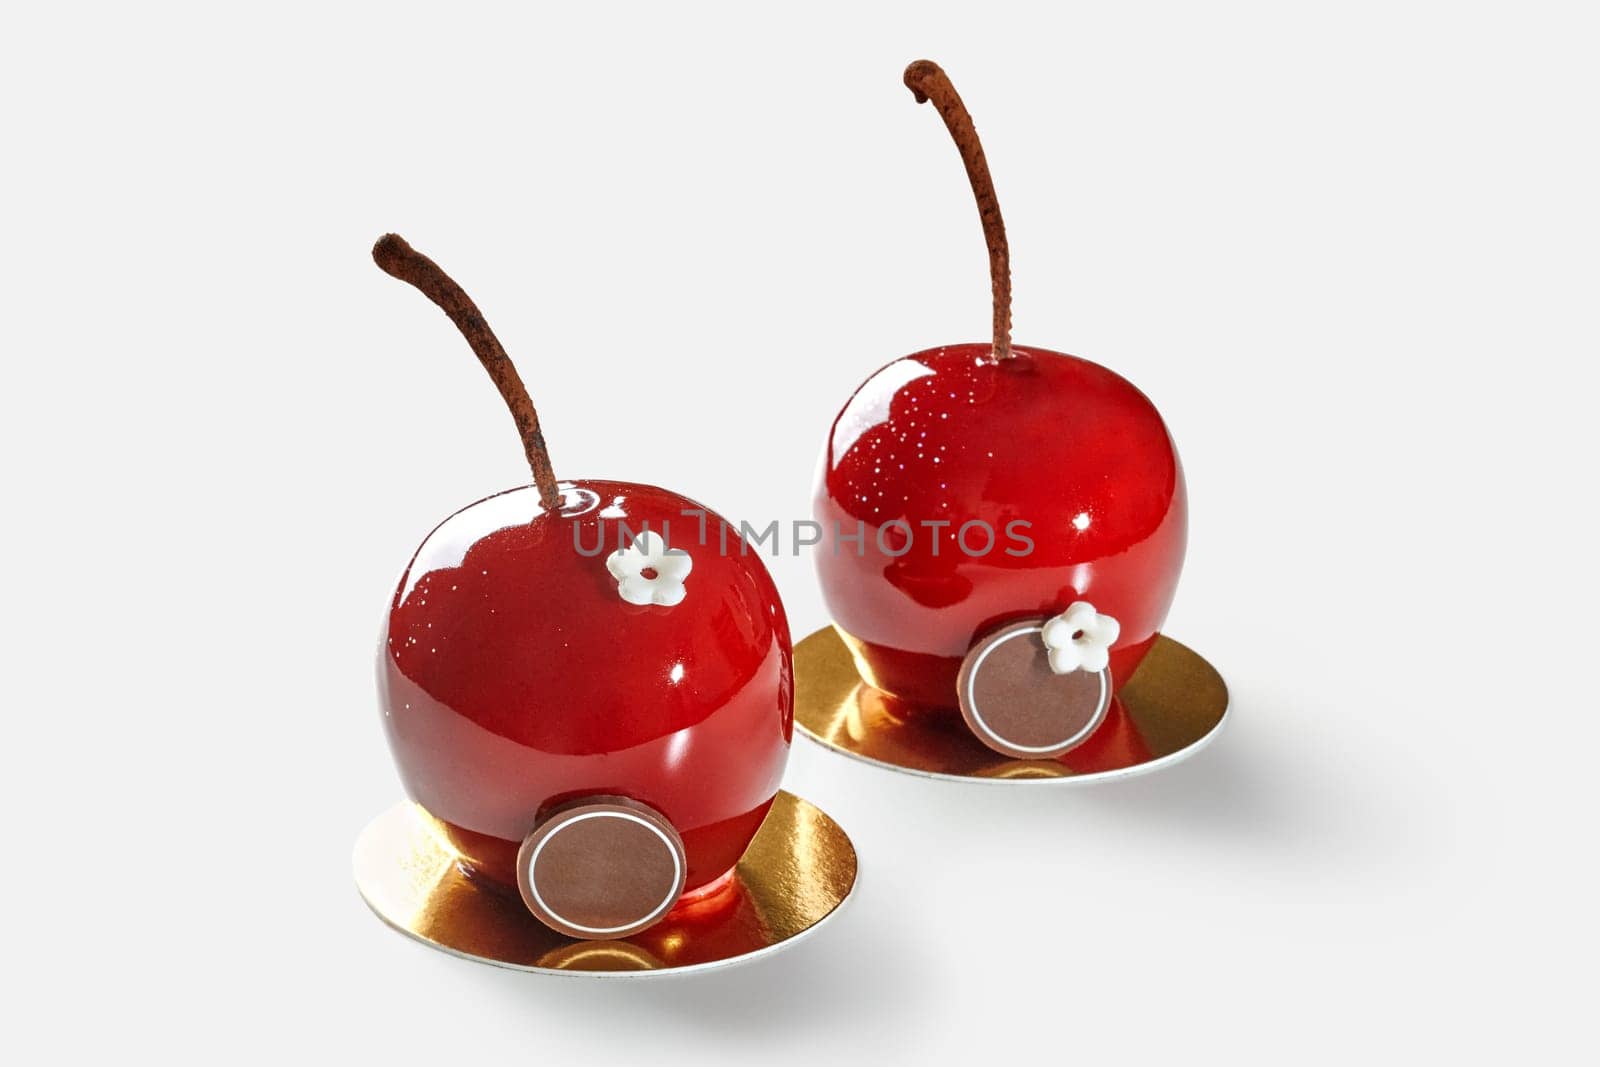 Tempting cherry-shaped pastries topped with red glossy glaze presented on gold cardboard cake base, isolated on white background. Artisan desserts concept